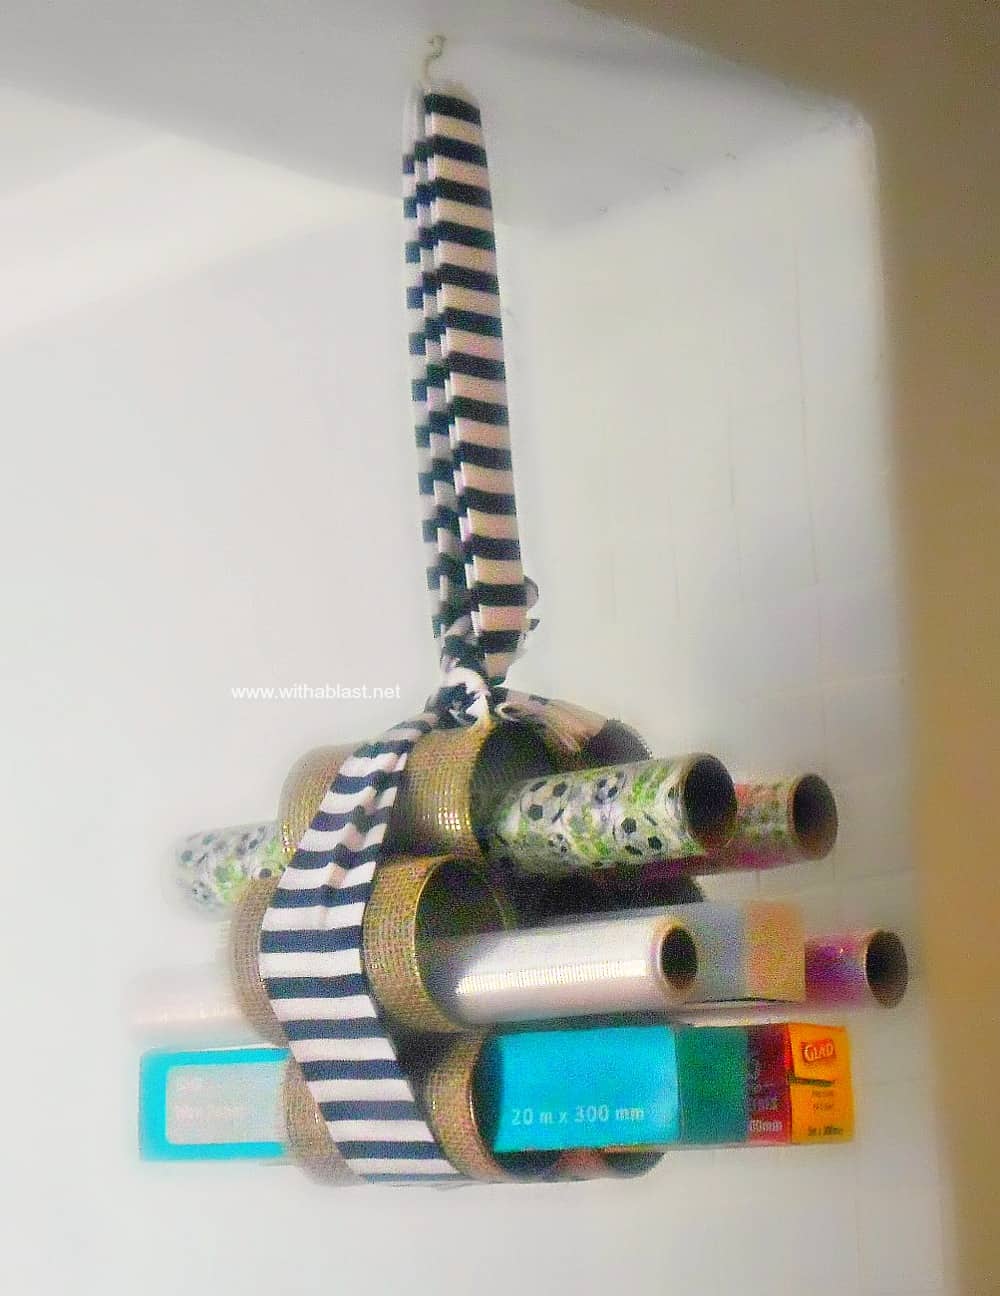 DIY Hanging Wraps Holder ~ Quick and Easy craft ! Use Empty cans to create this handy, hanging holder for all those rolls of wraps.